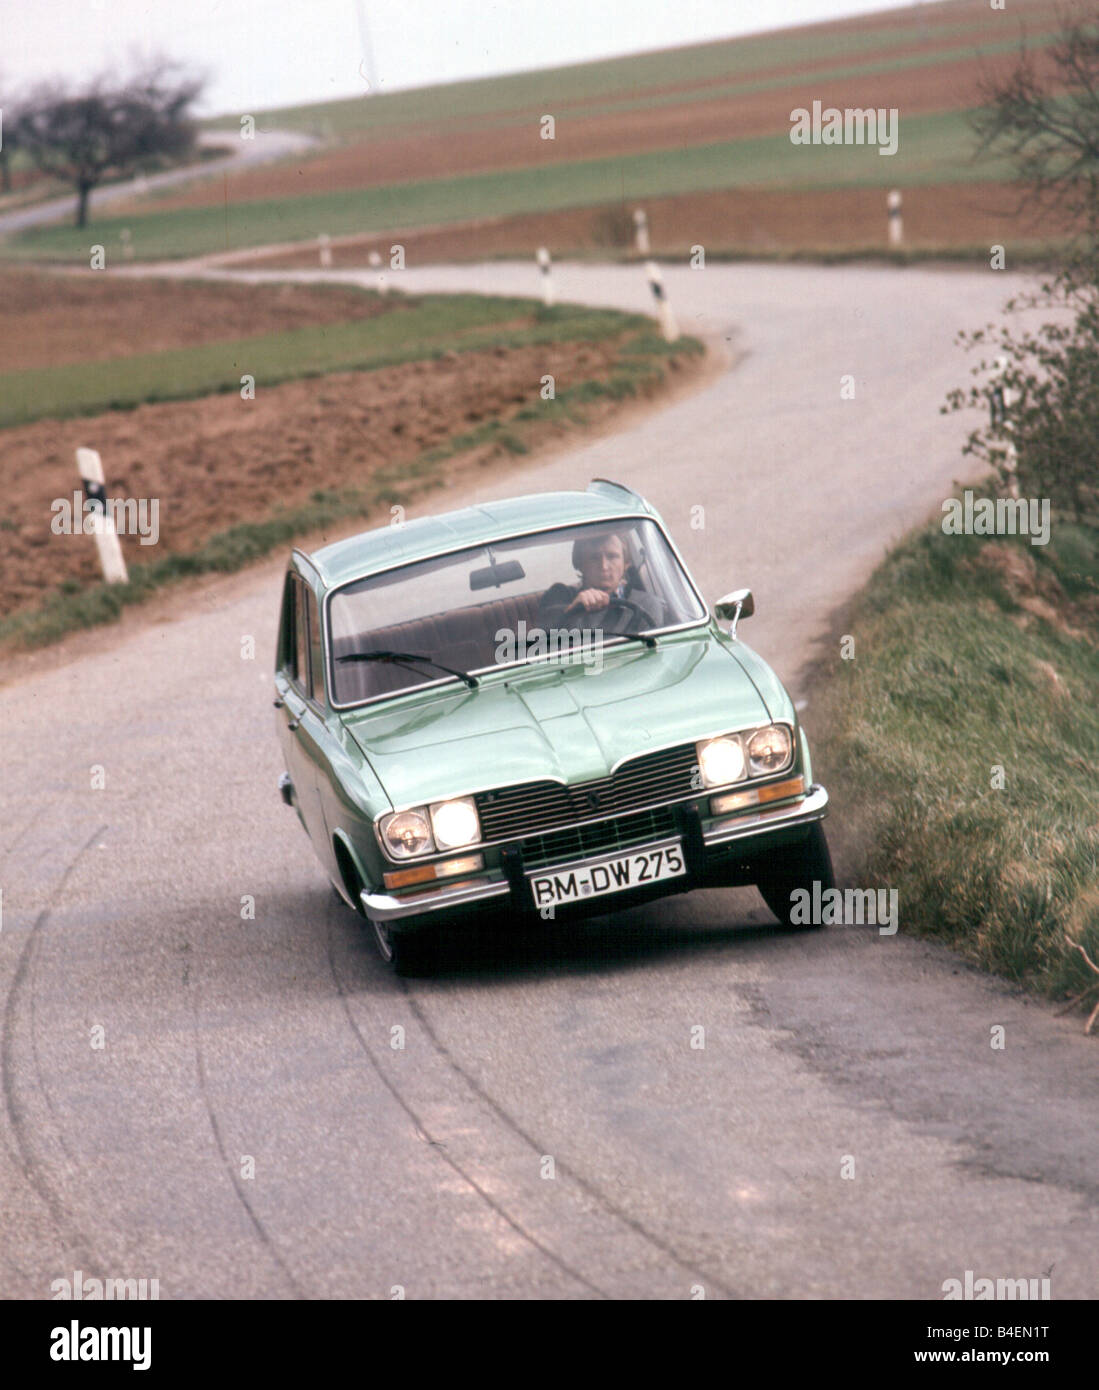 Car, Renault 16 TX, model year 1974-1976, old car, 1970s, seventies,  driving, diagonal front, front view, road, country road, p Stock Photo